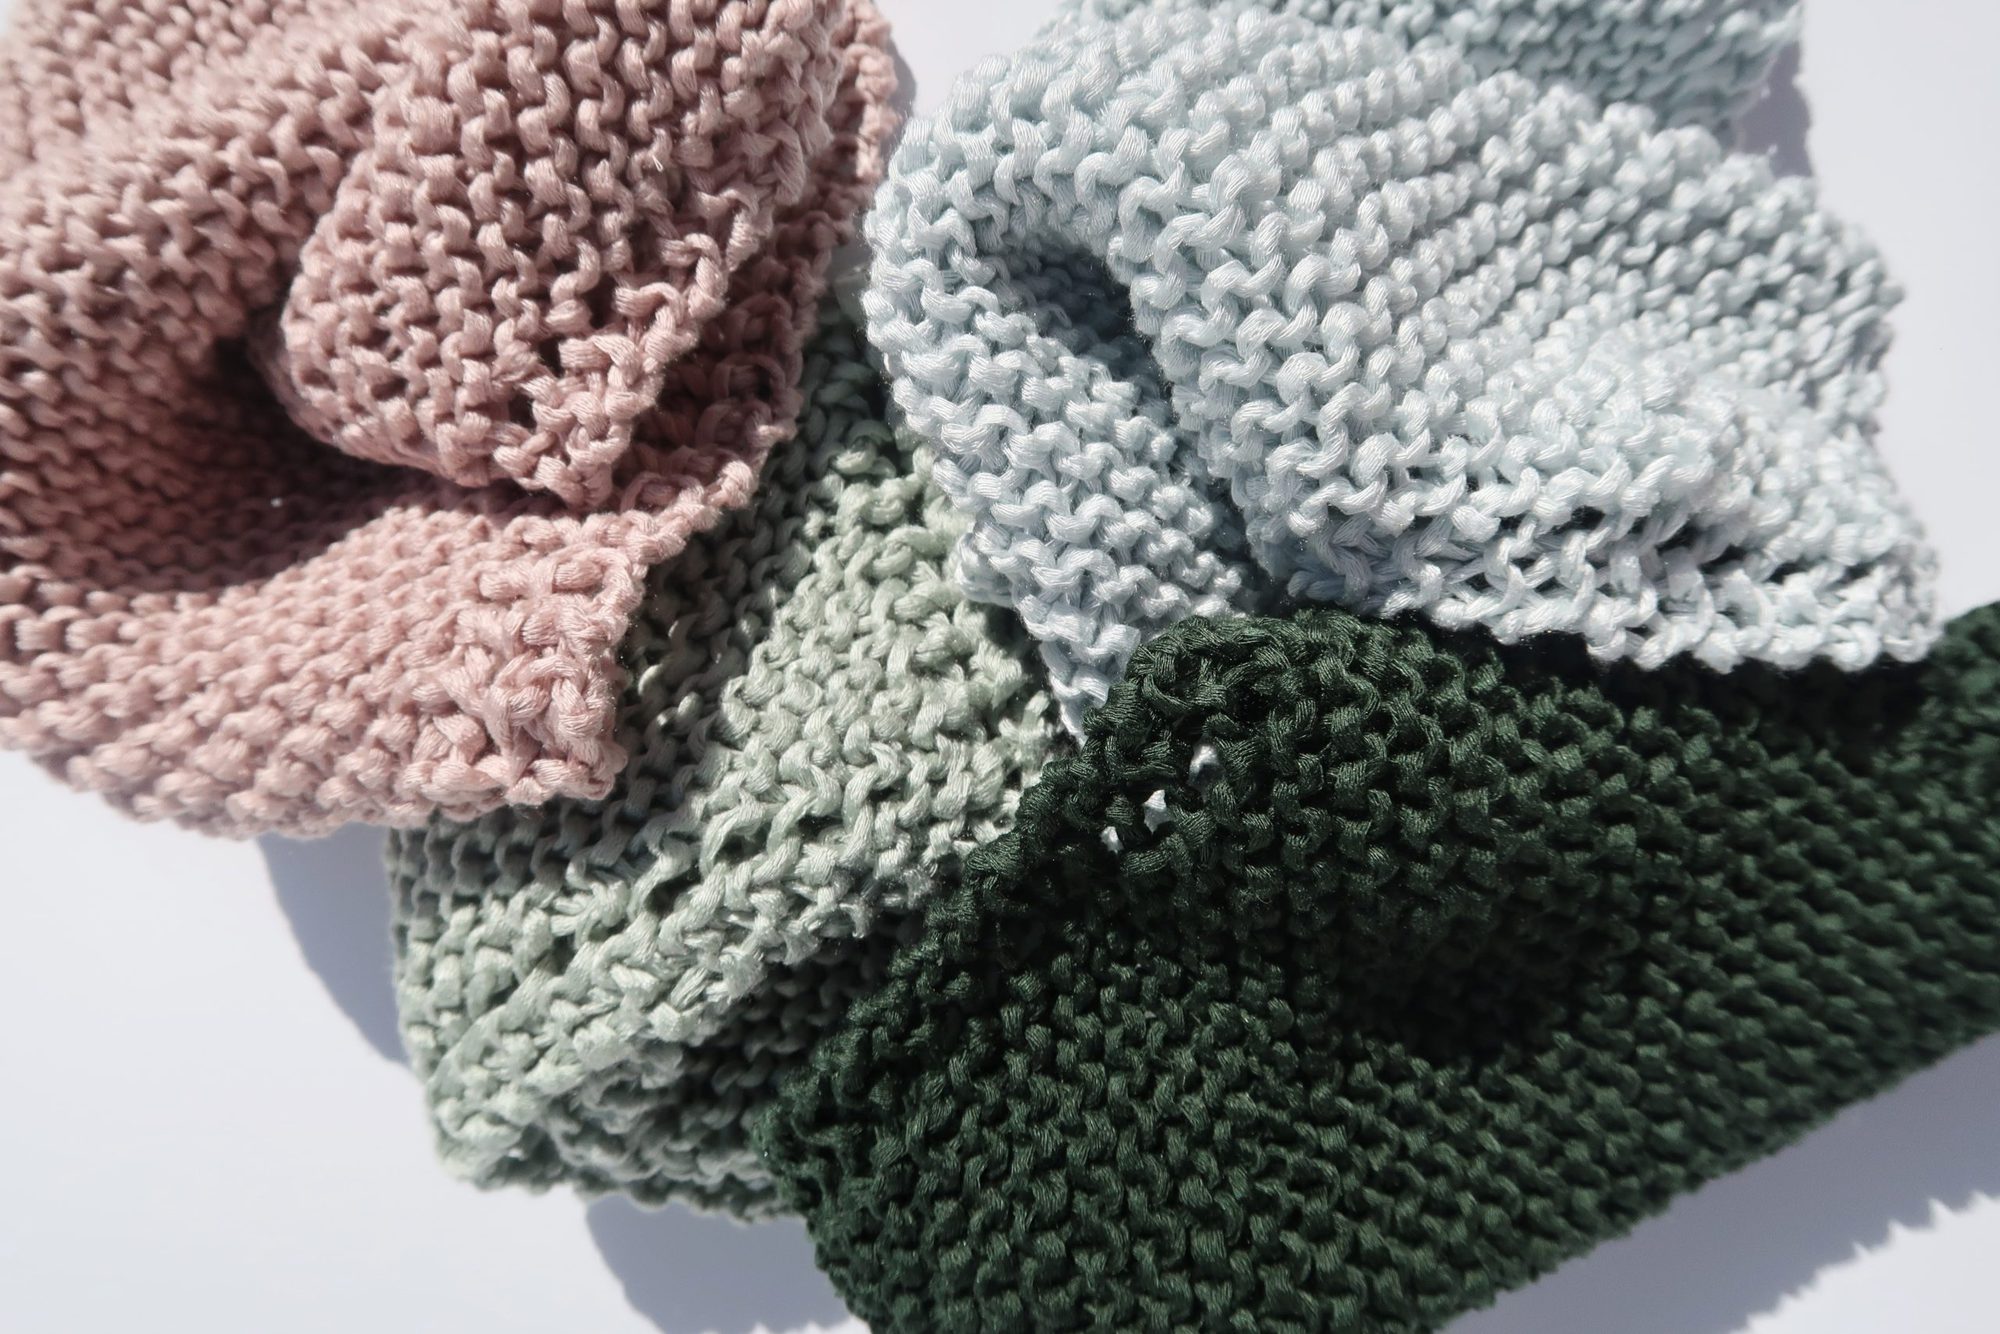 Supersoft Facecloth